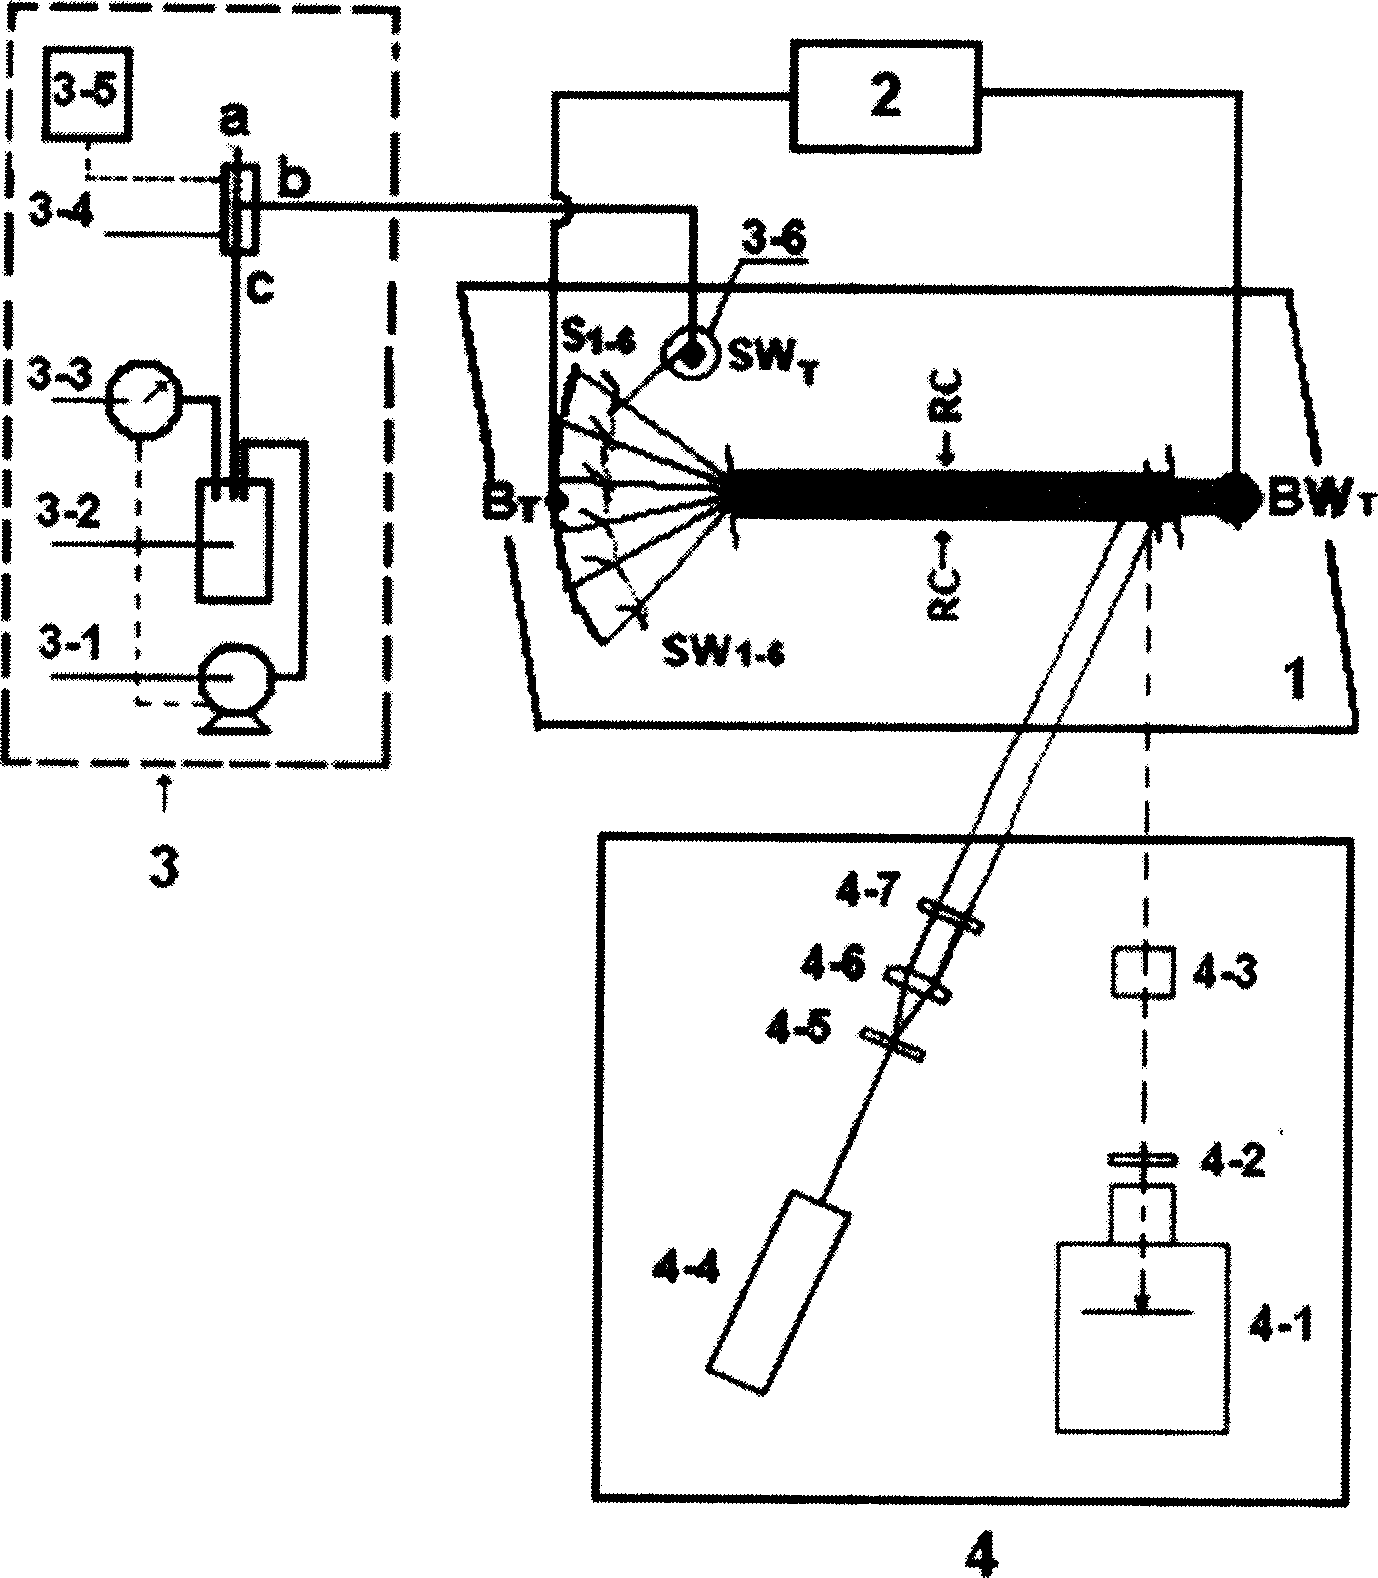 Ngatively pressurized sampling three-dimensional chip capillary array electrophoresis system